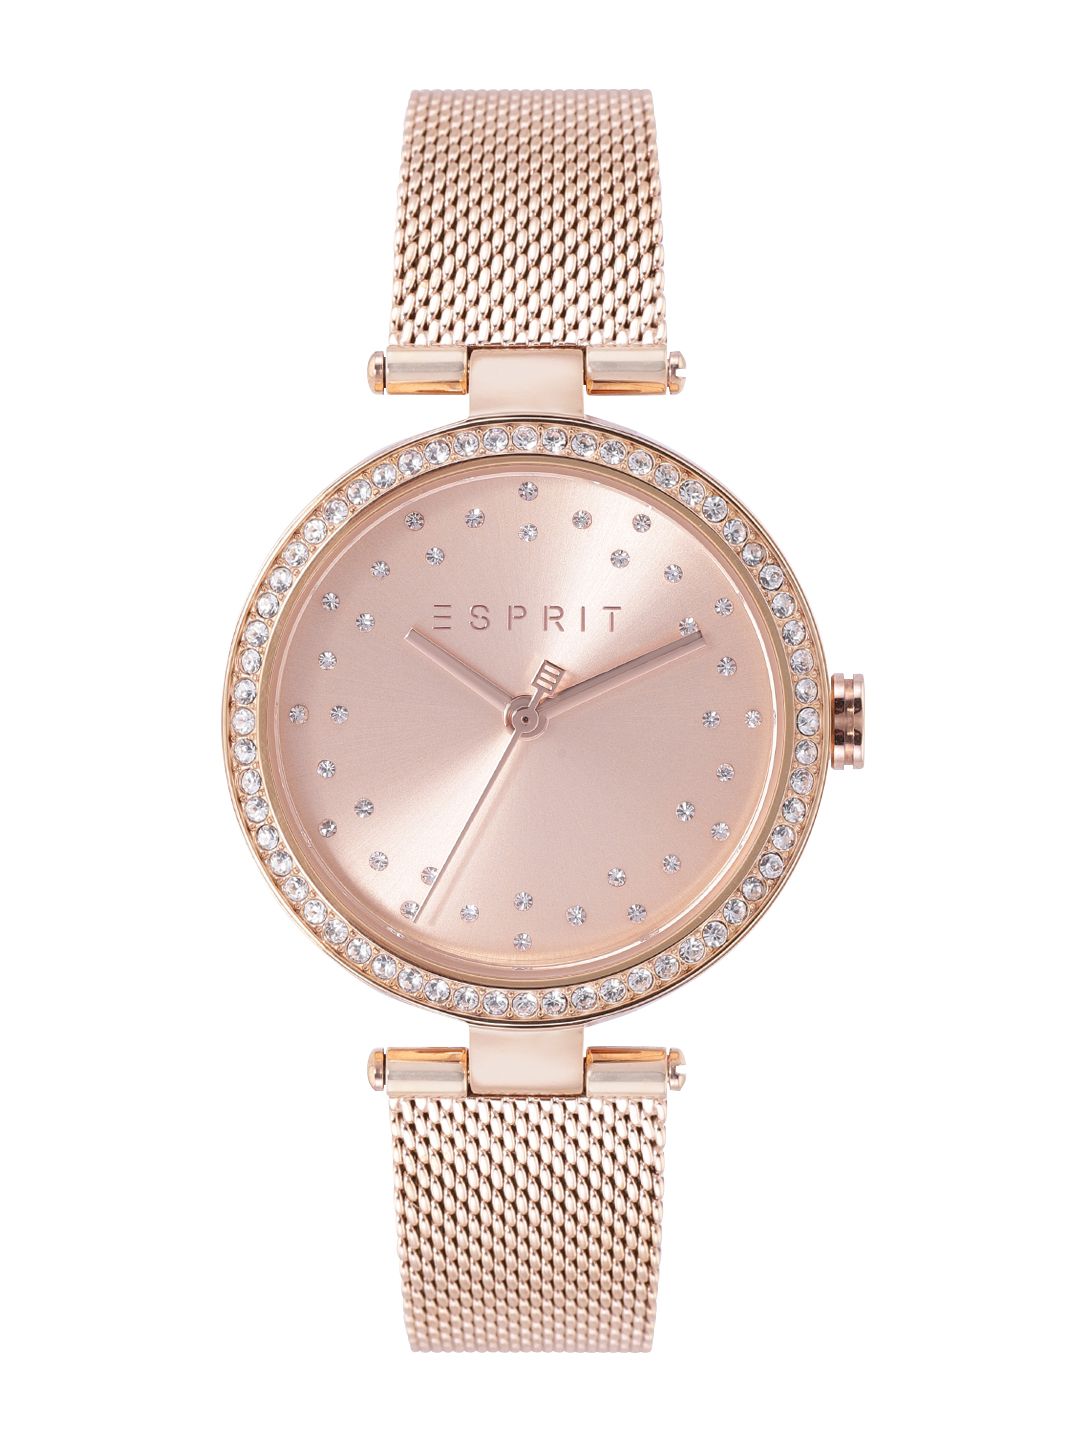 ESPRIT Women Rose Gold-Toned Embellished Analogue Watch ES1L199M0065 Price in India